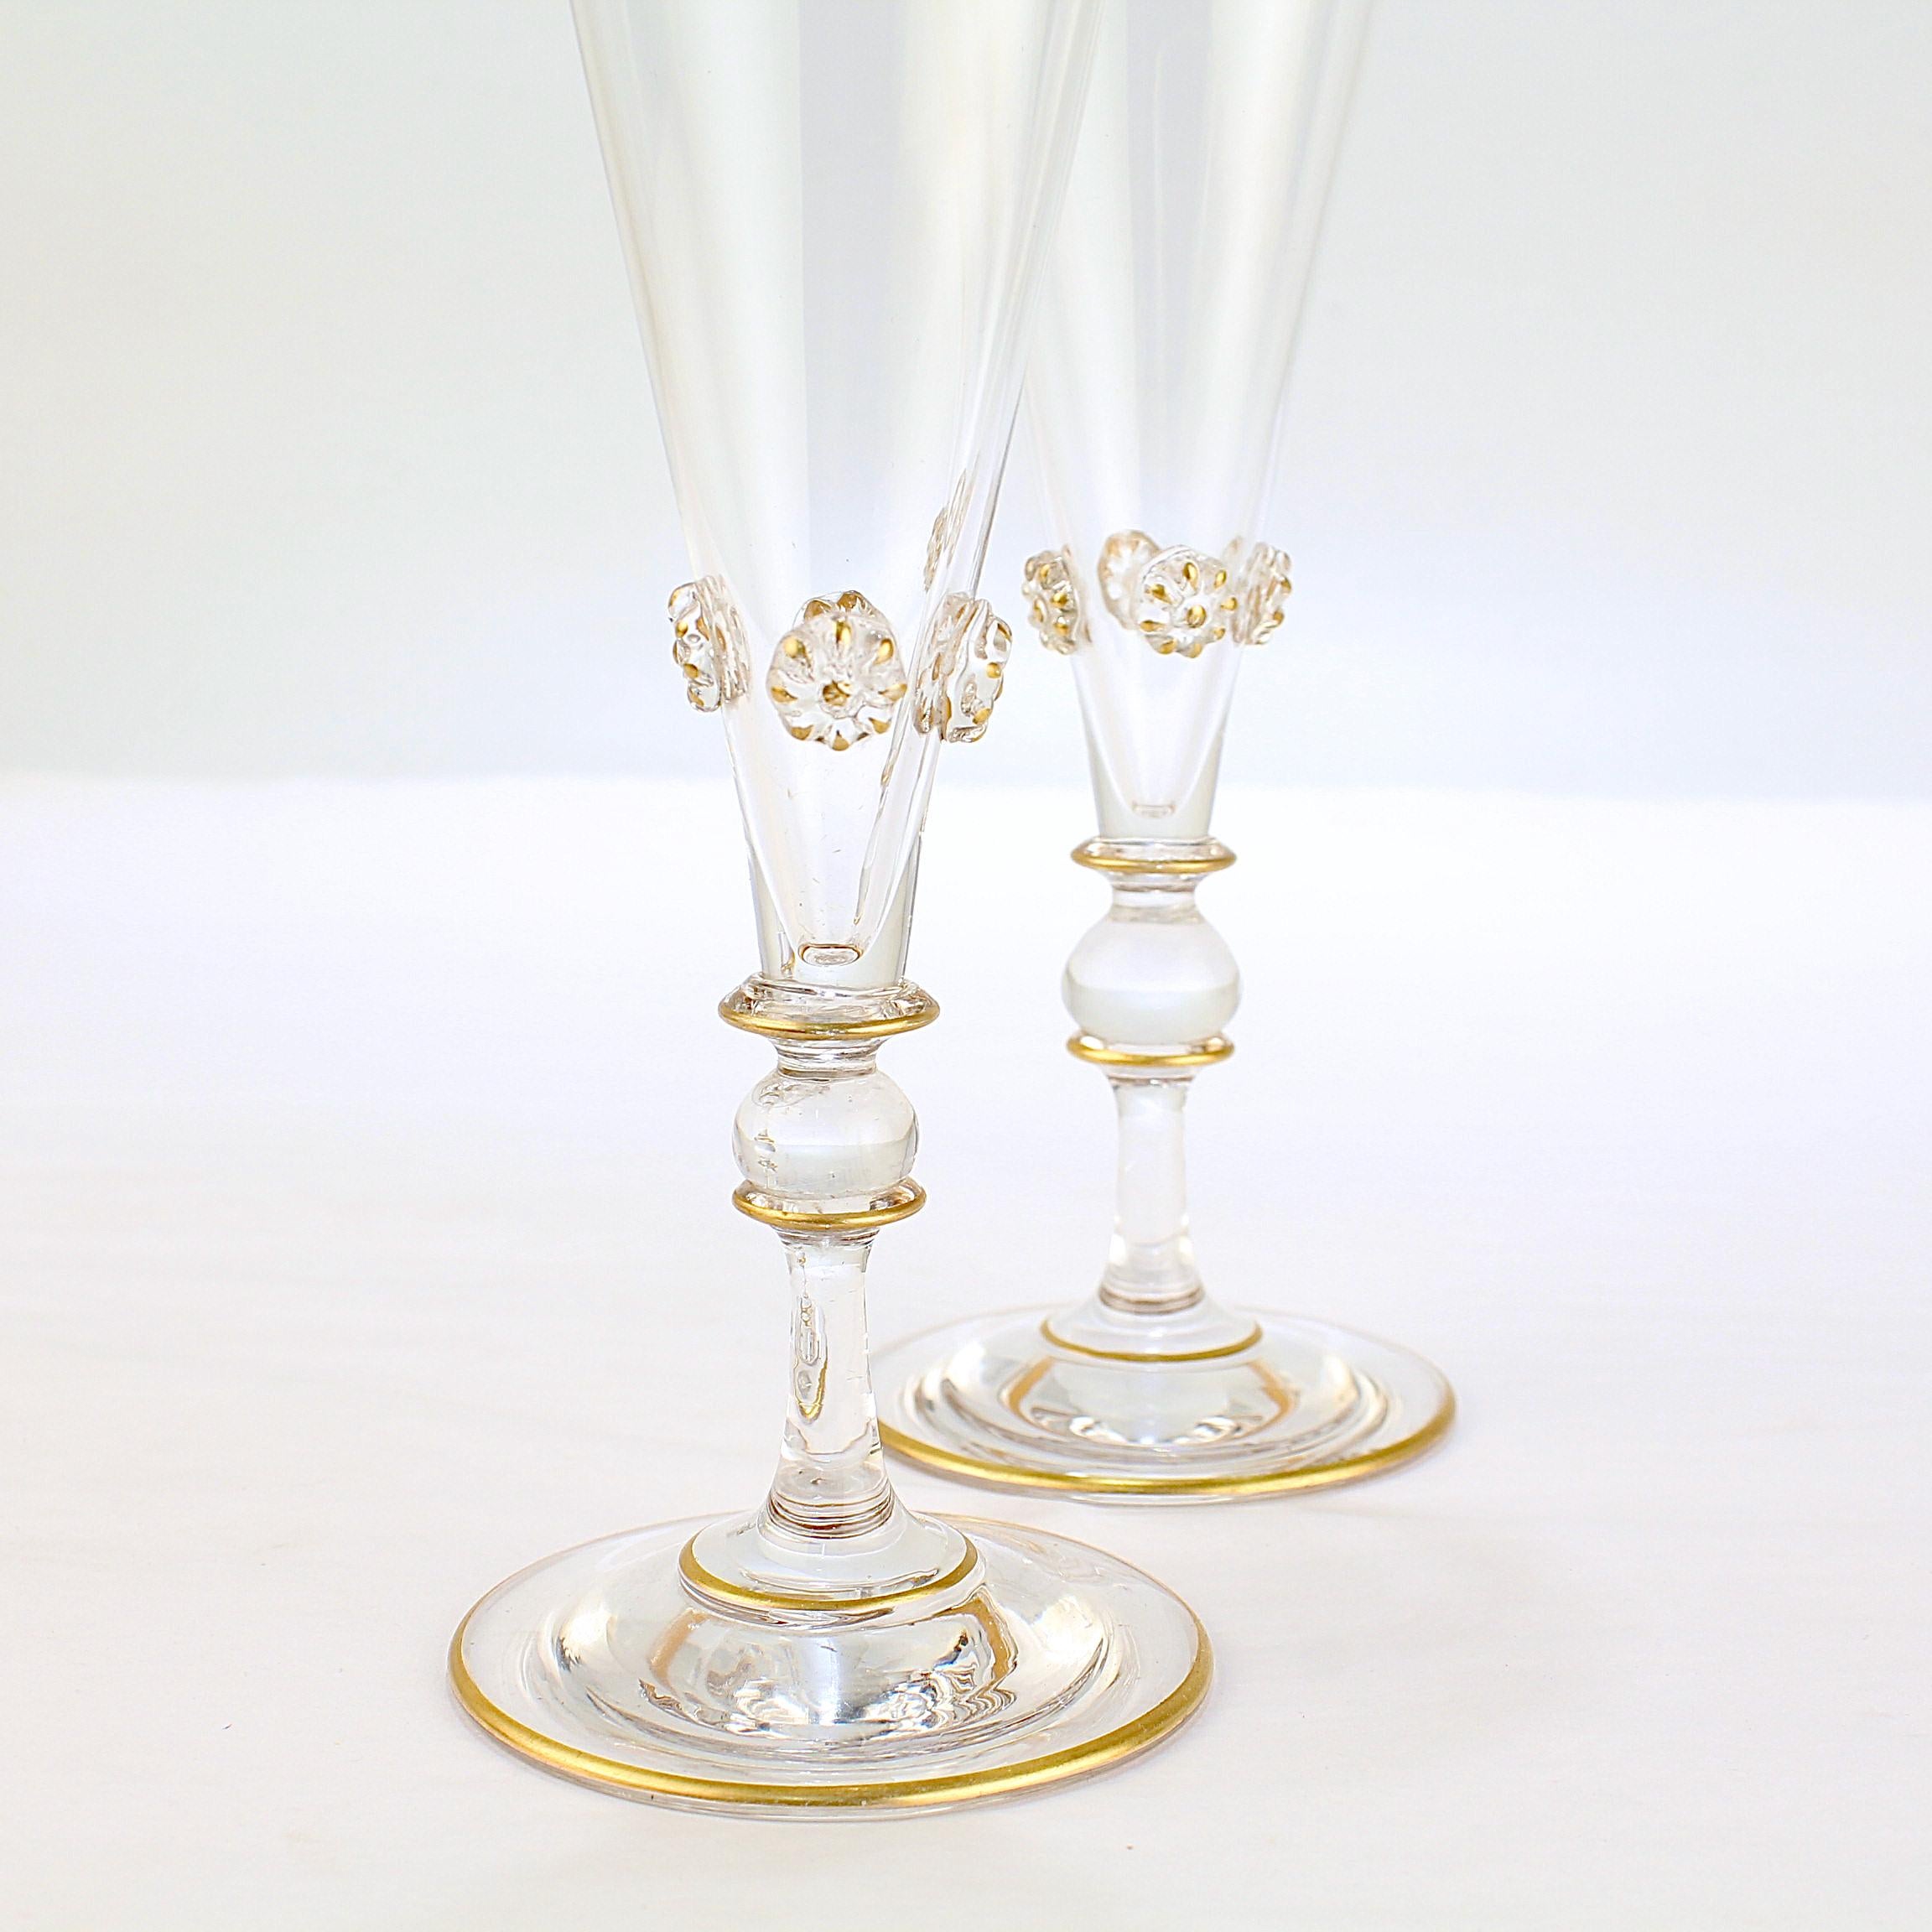 Pair of Old or Antique Bohemian Glass Champagne Flutes with Applied Knops 1